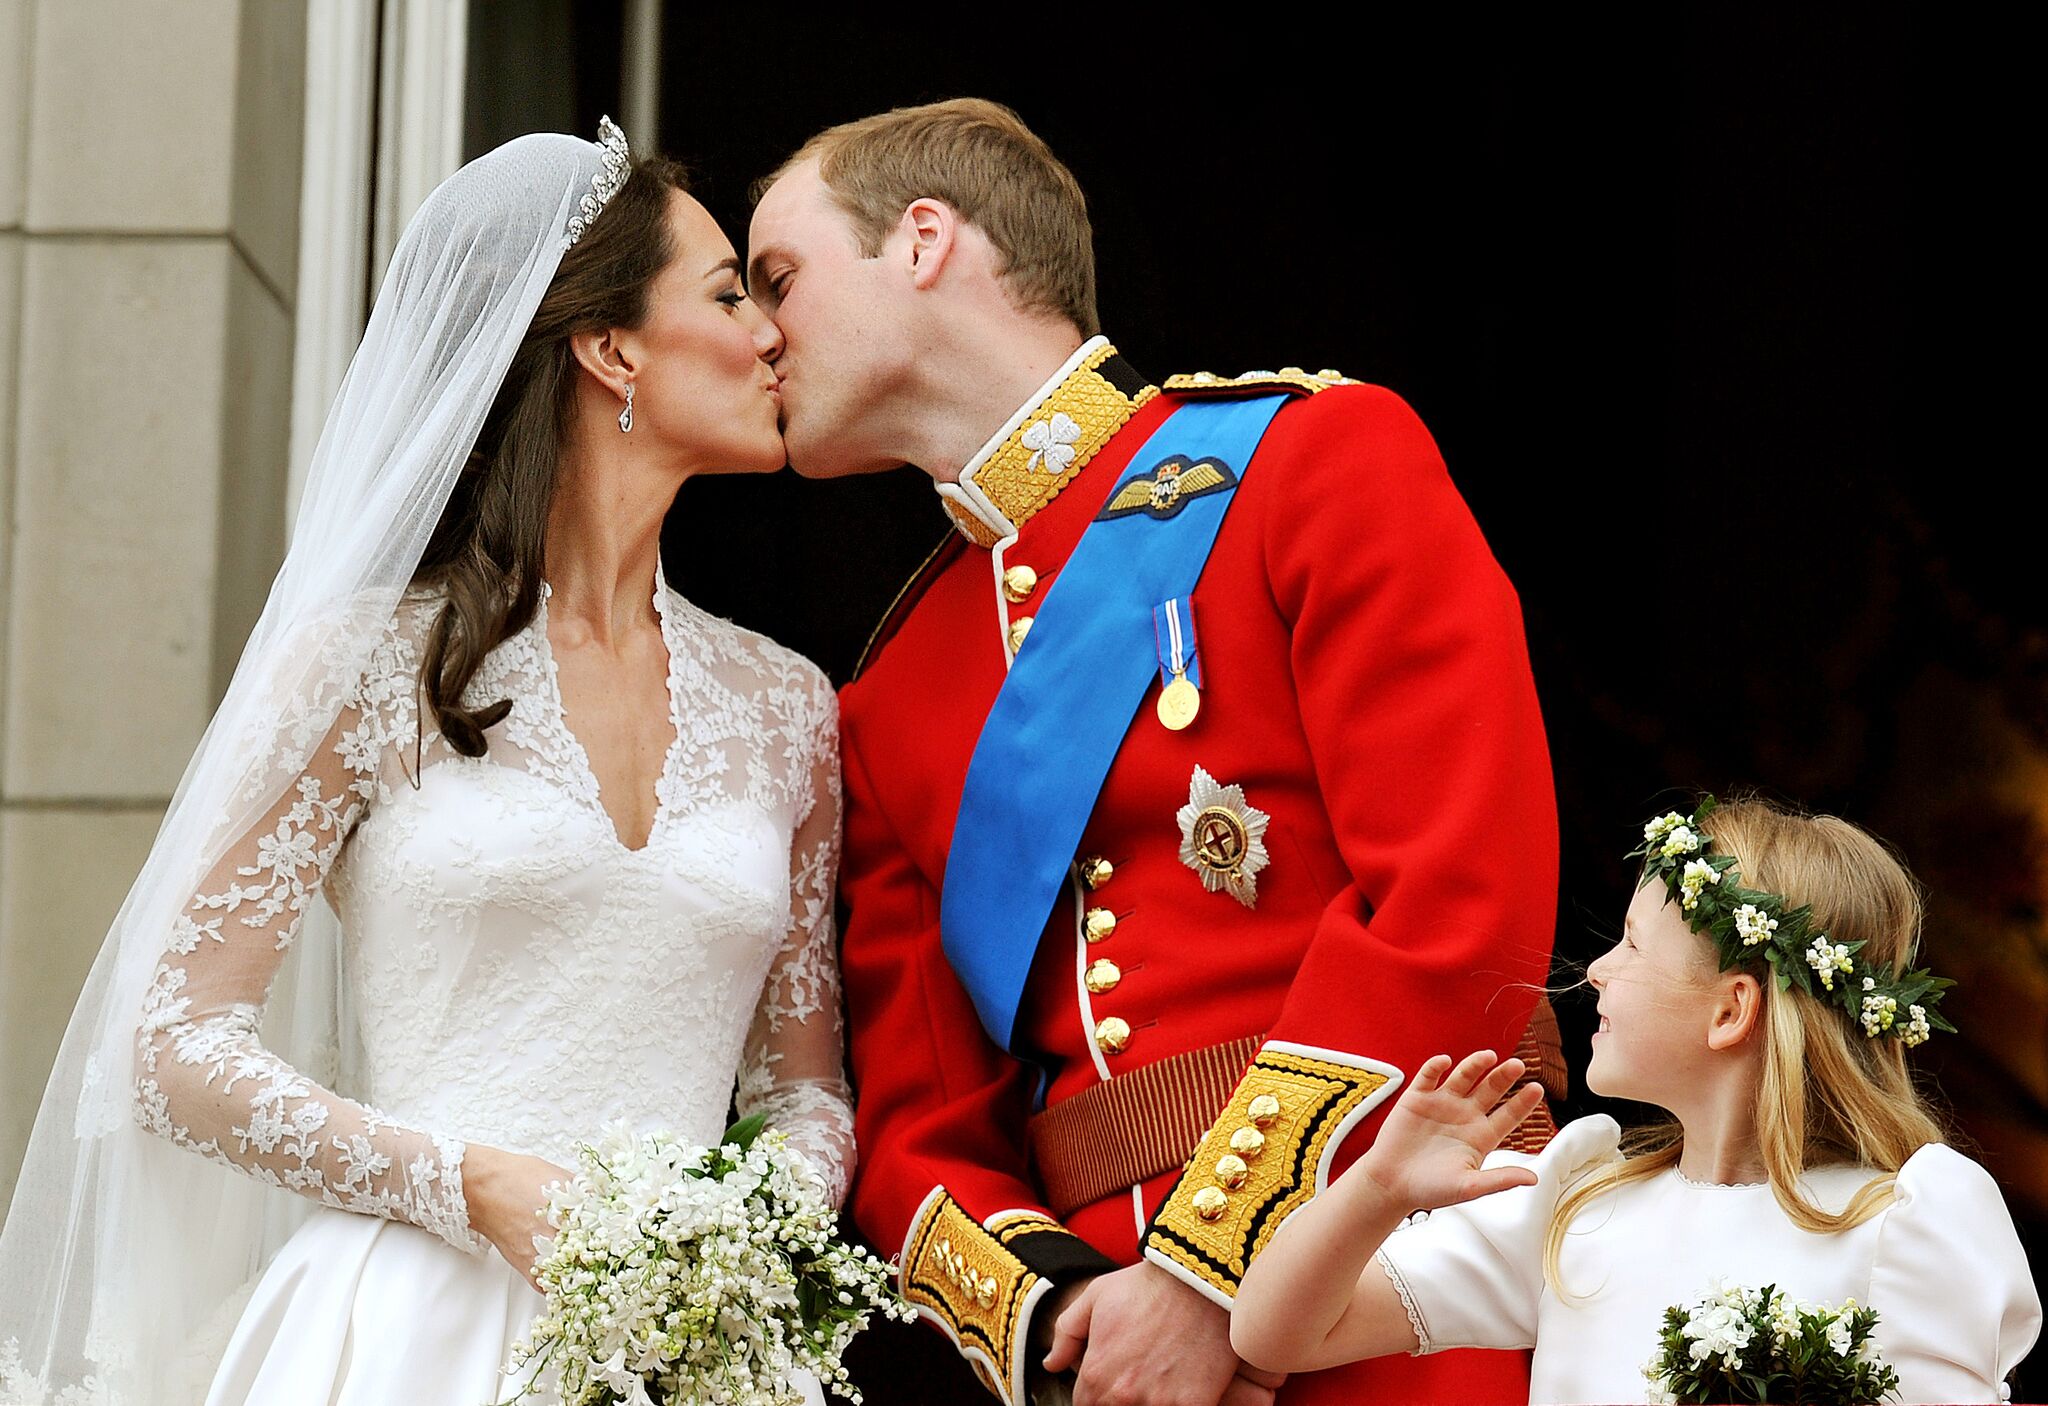 Prince William and Kate Middleton's kiss on the balcony on their wedding day | Getty Images